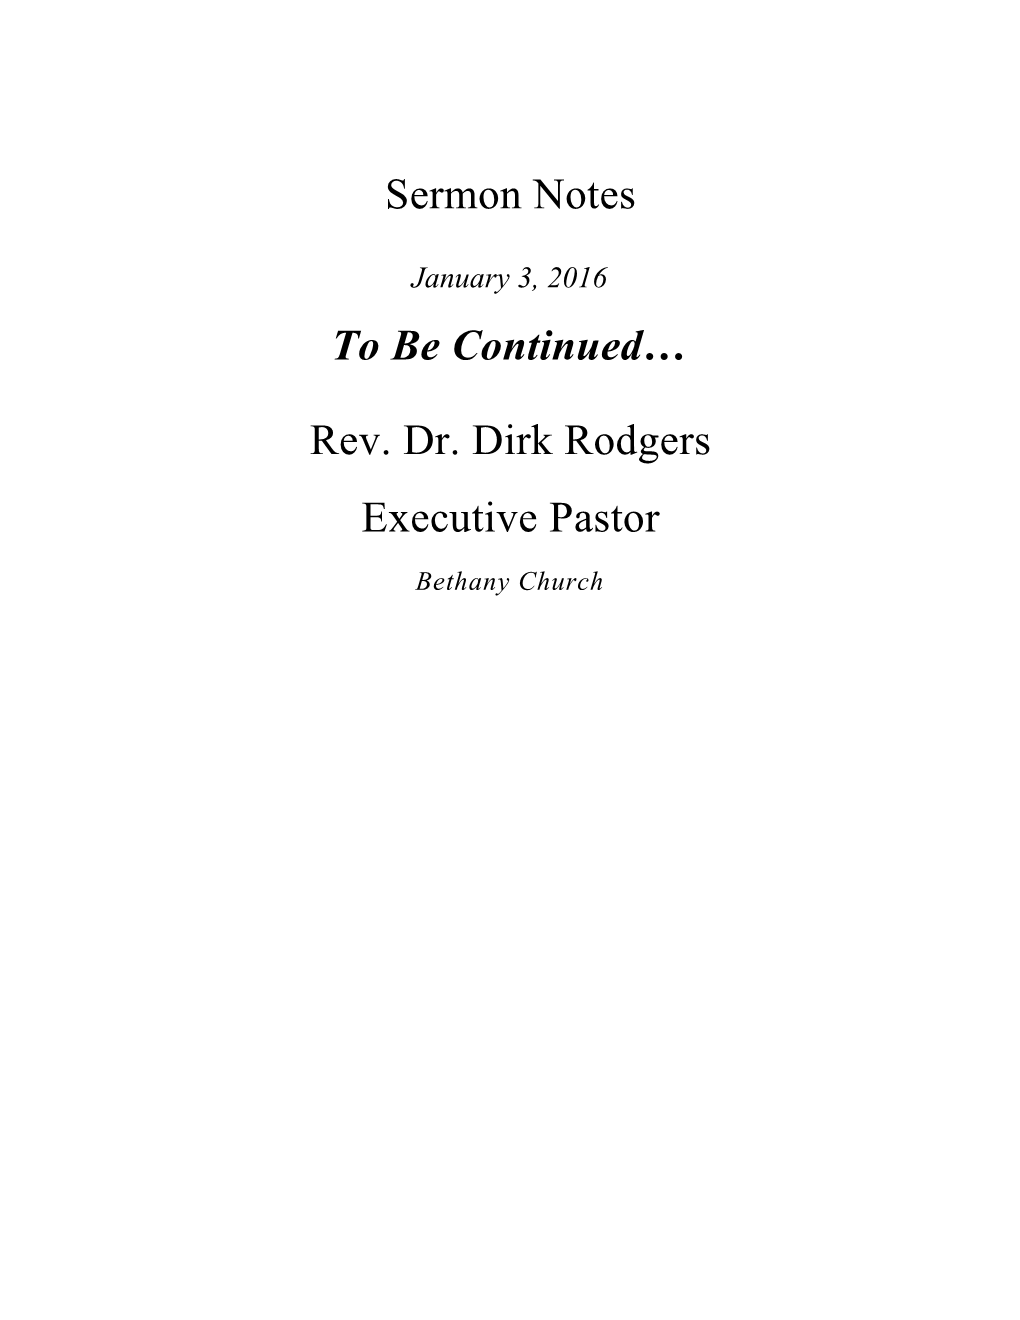 Sermon Notes: to Be Continued Psalm 2